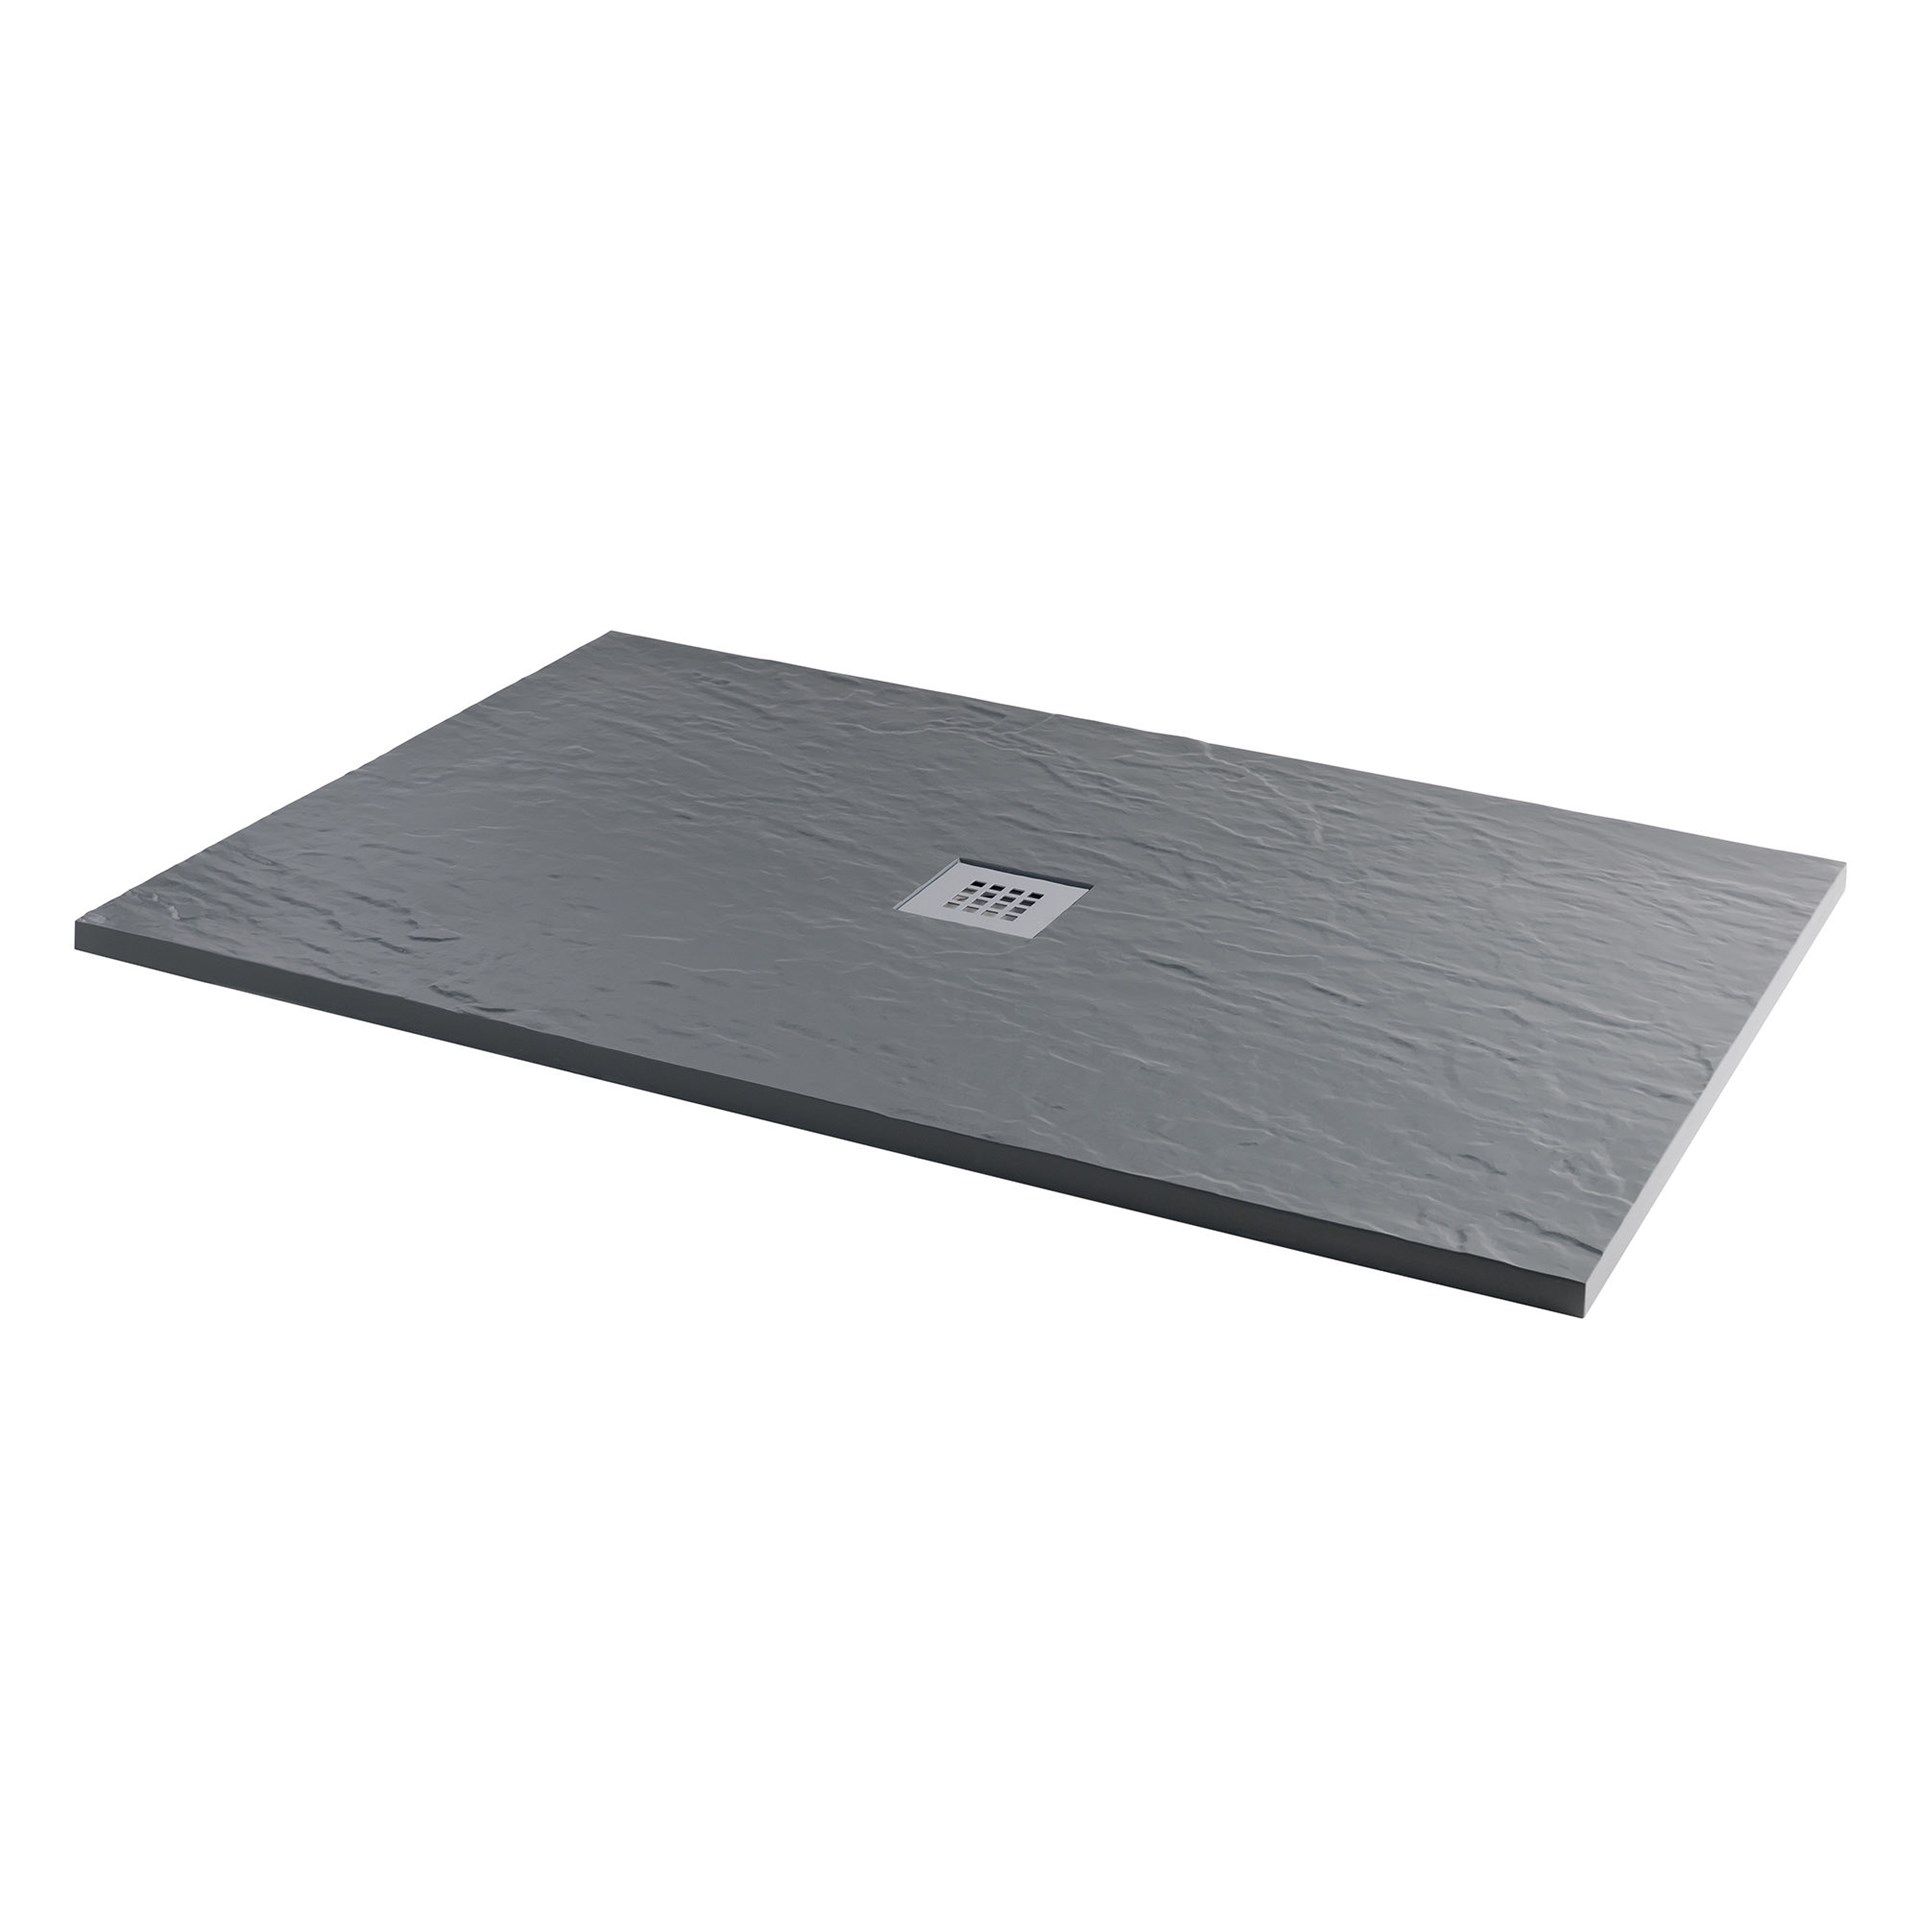 NEW (D9) 1600x900mm Rectangular Slate Effect Shower Tray in Grey. Manufactured in the UK from h... - Image 4 of 5